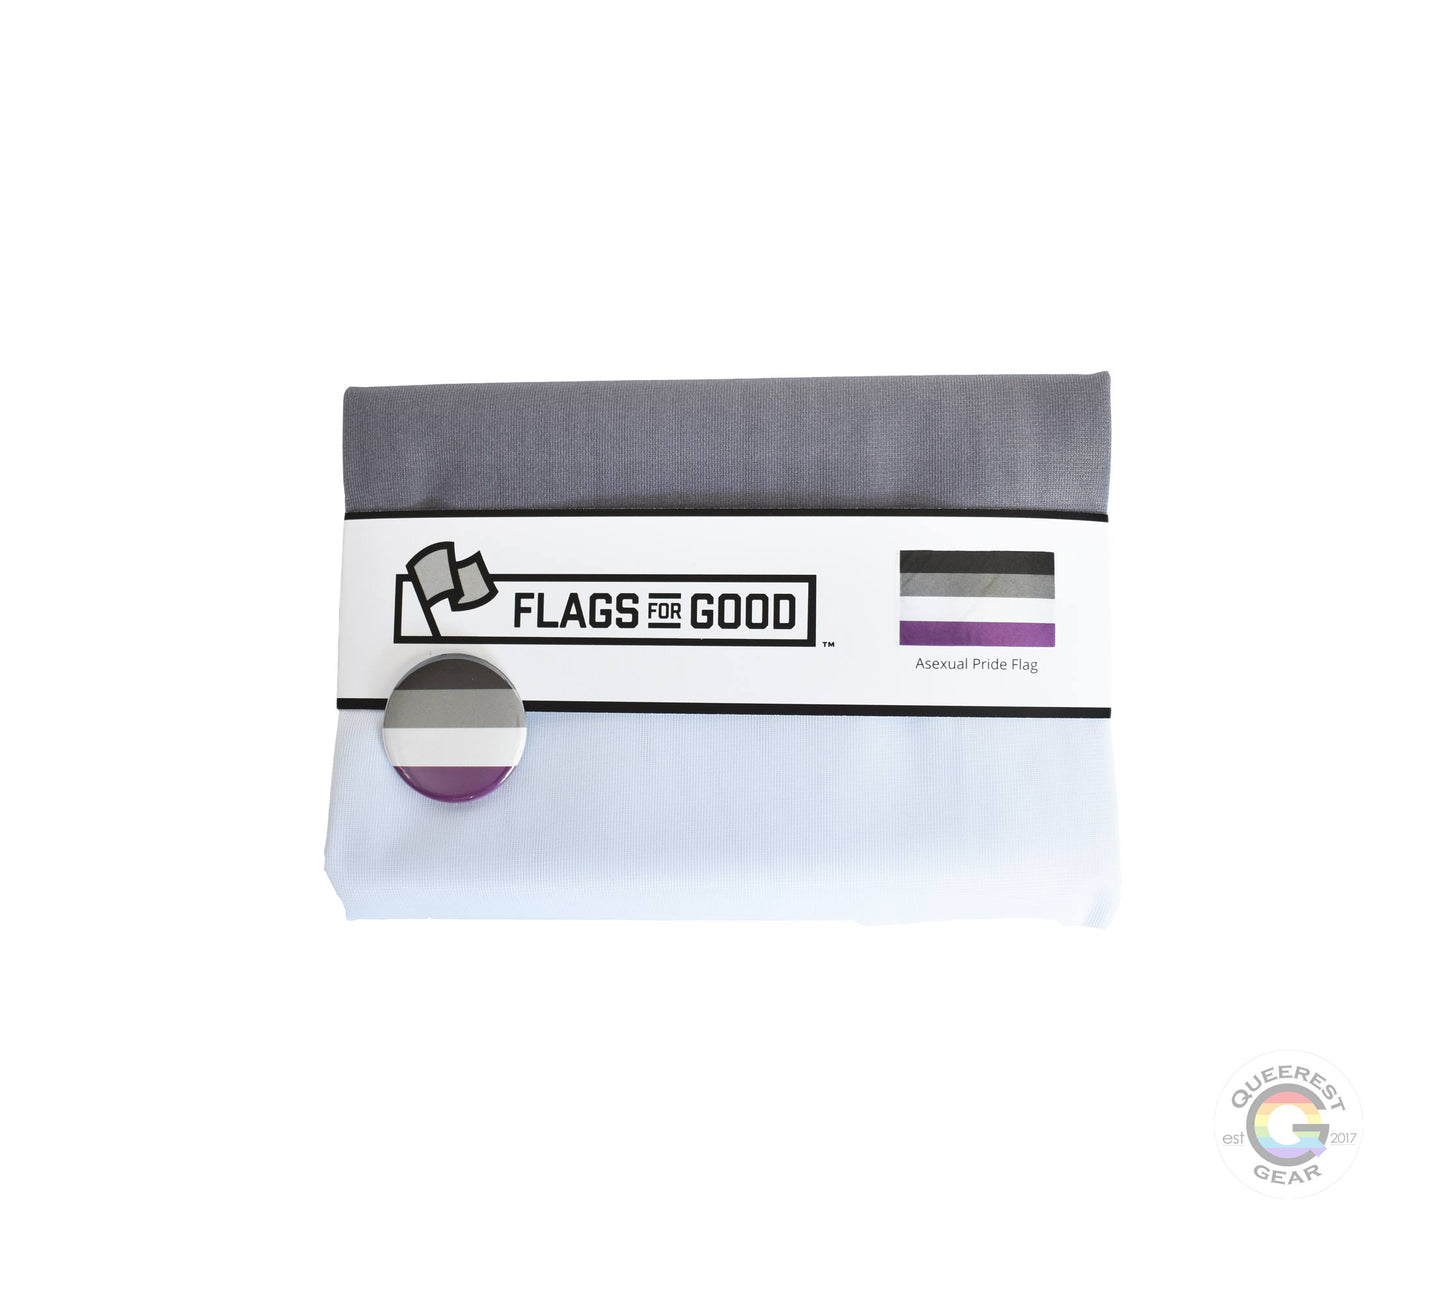 The asexual pride flag folded in its packaging with the matching free asexual flag button